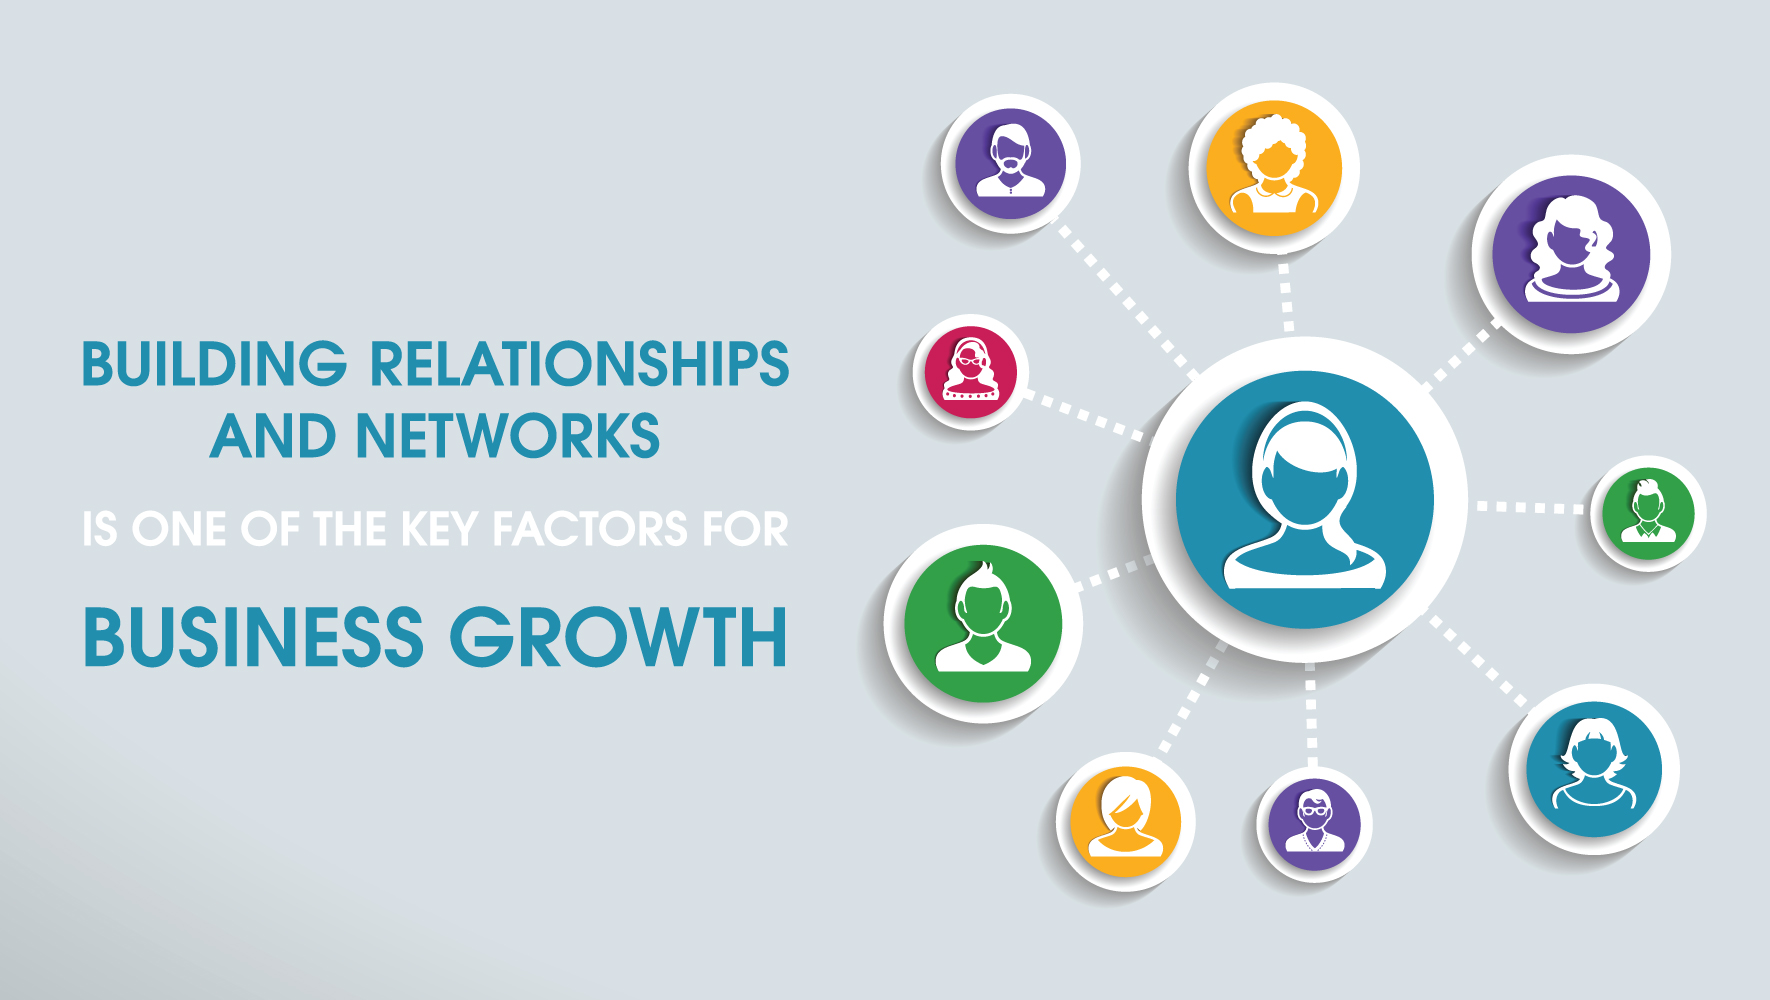 Building relationships and networks